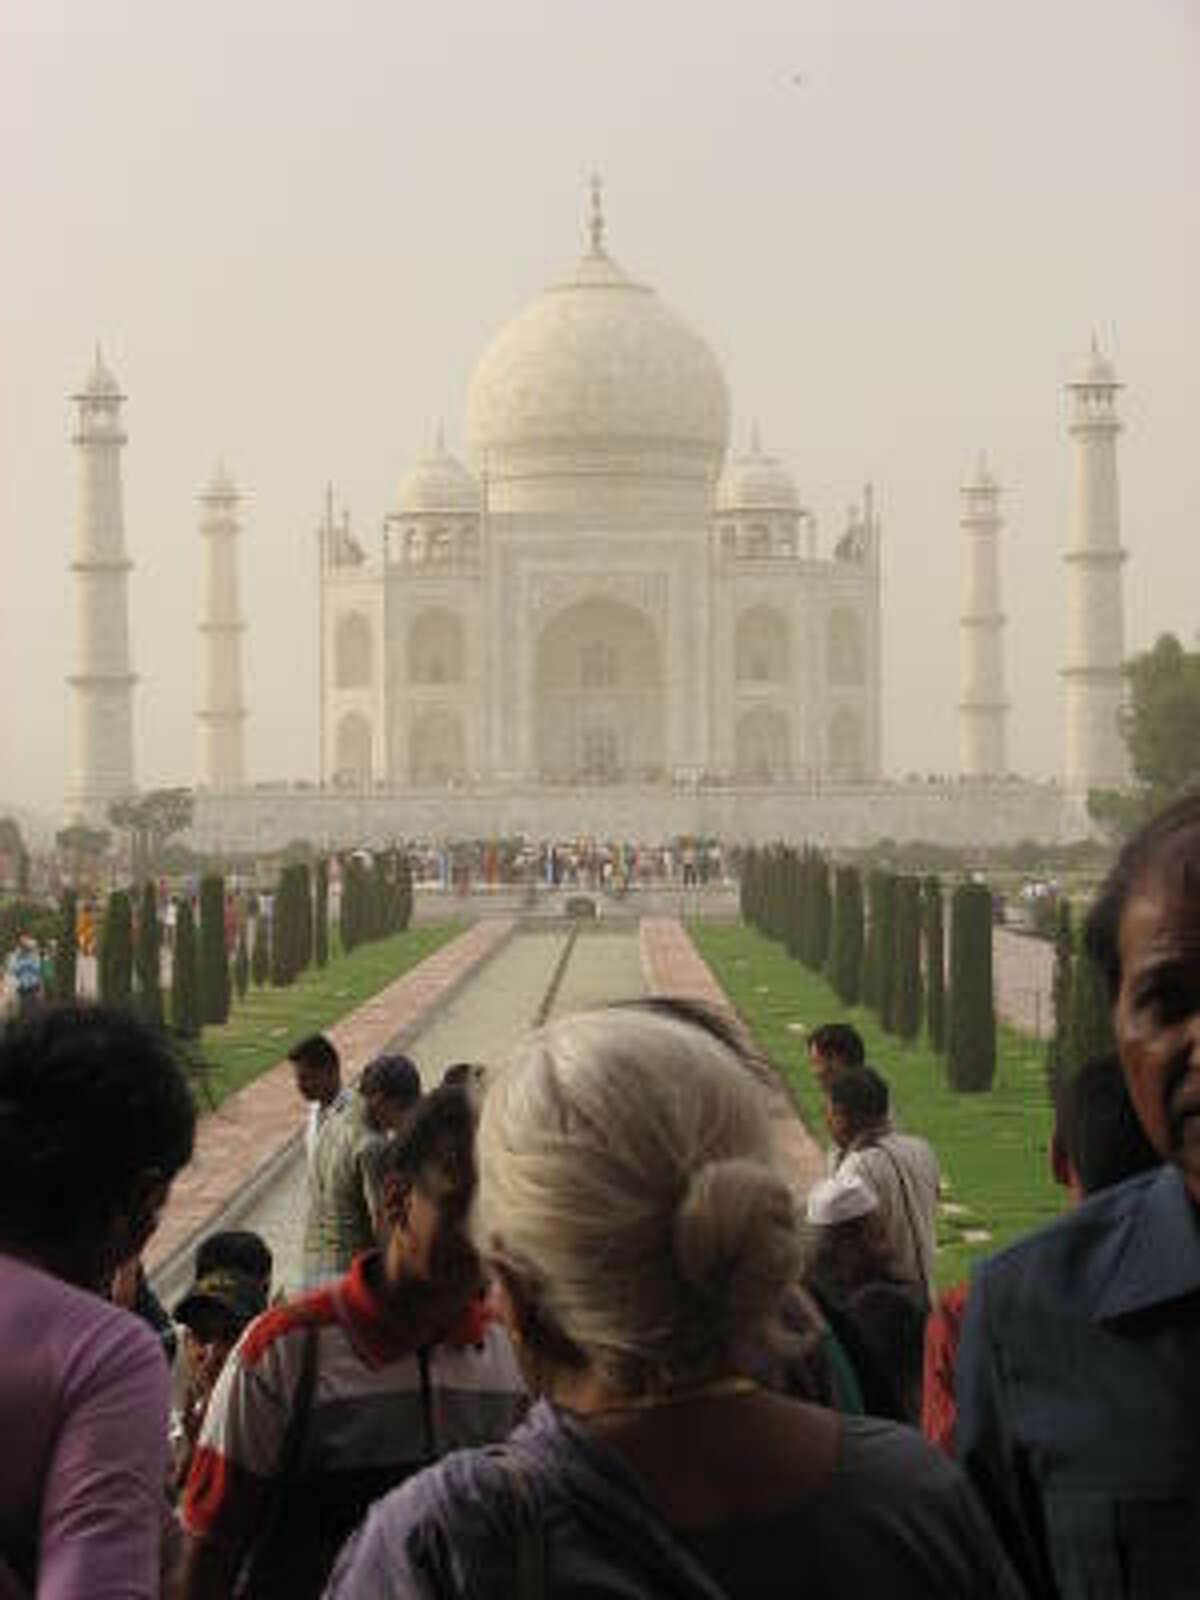 Even in a dust storm, the gardens of the Taj Mahal are packed with people.